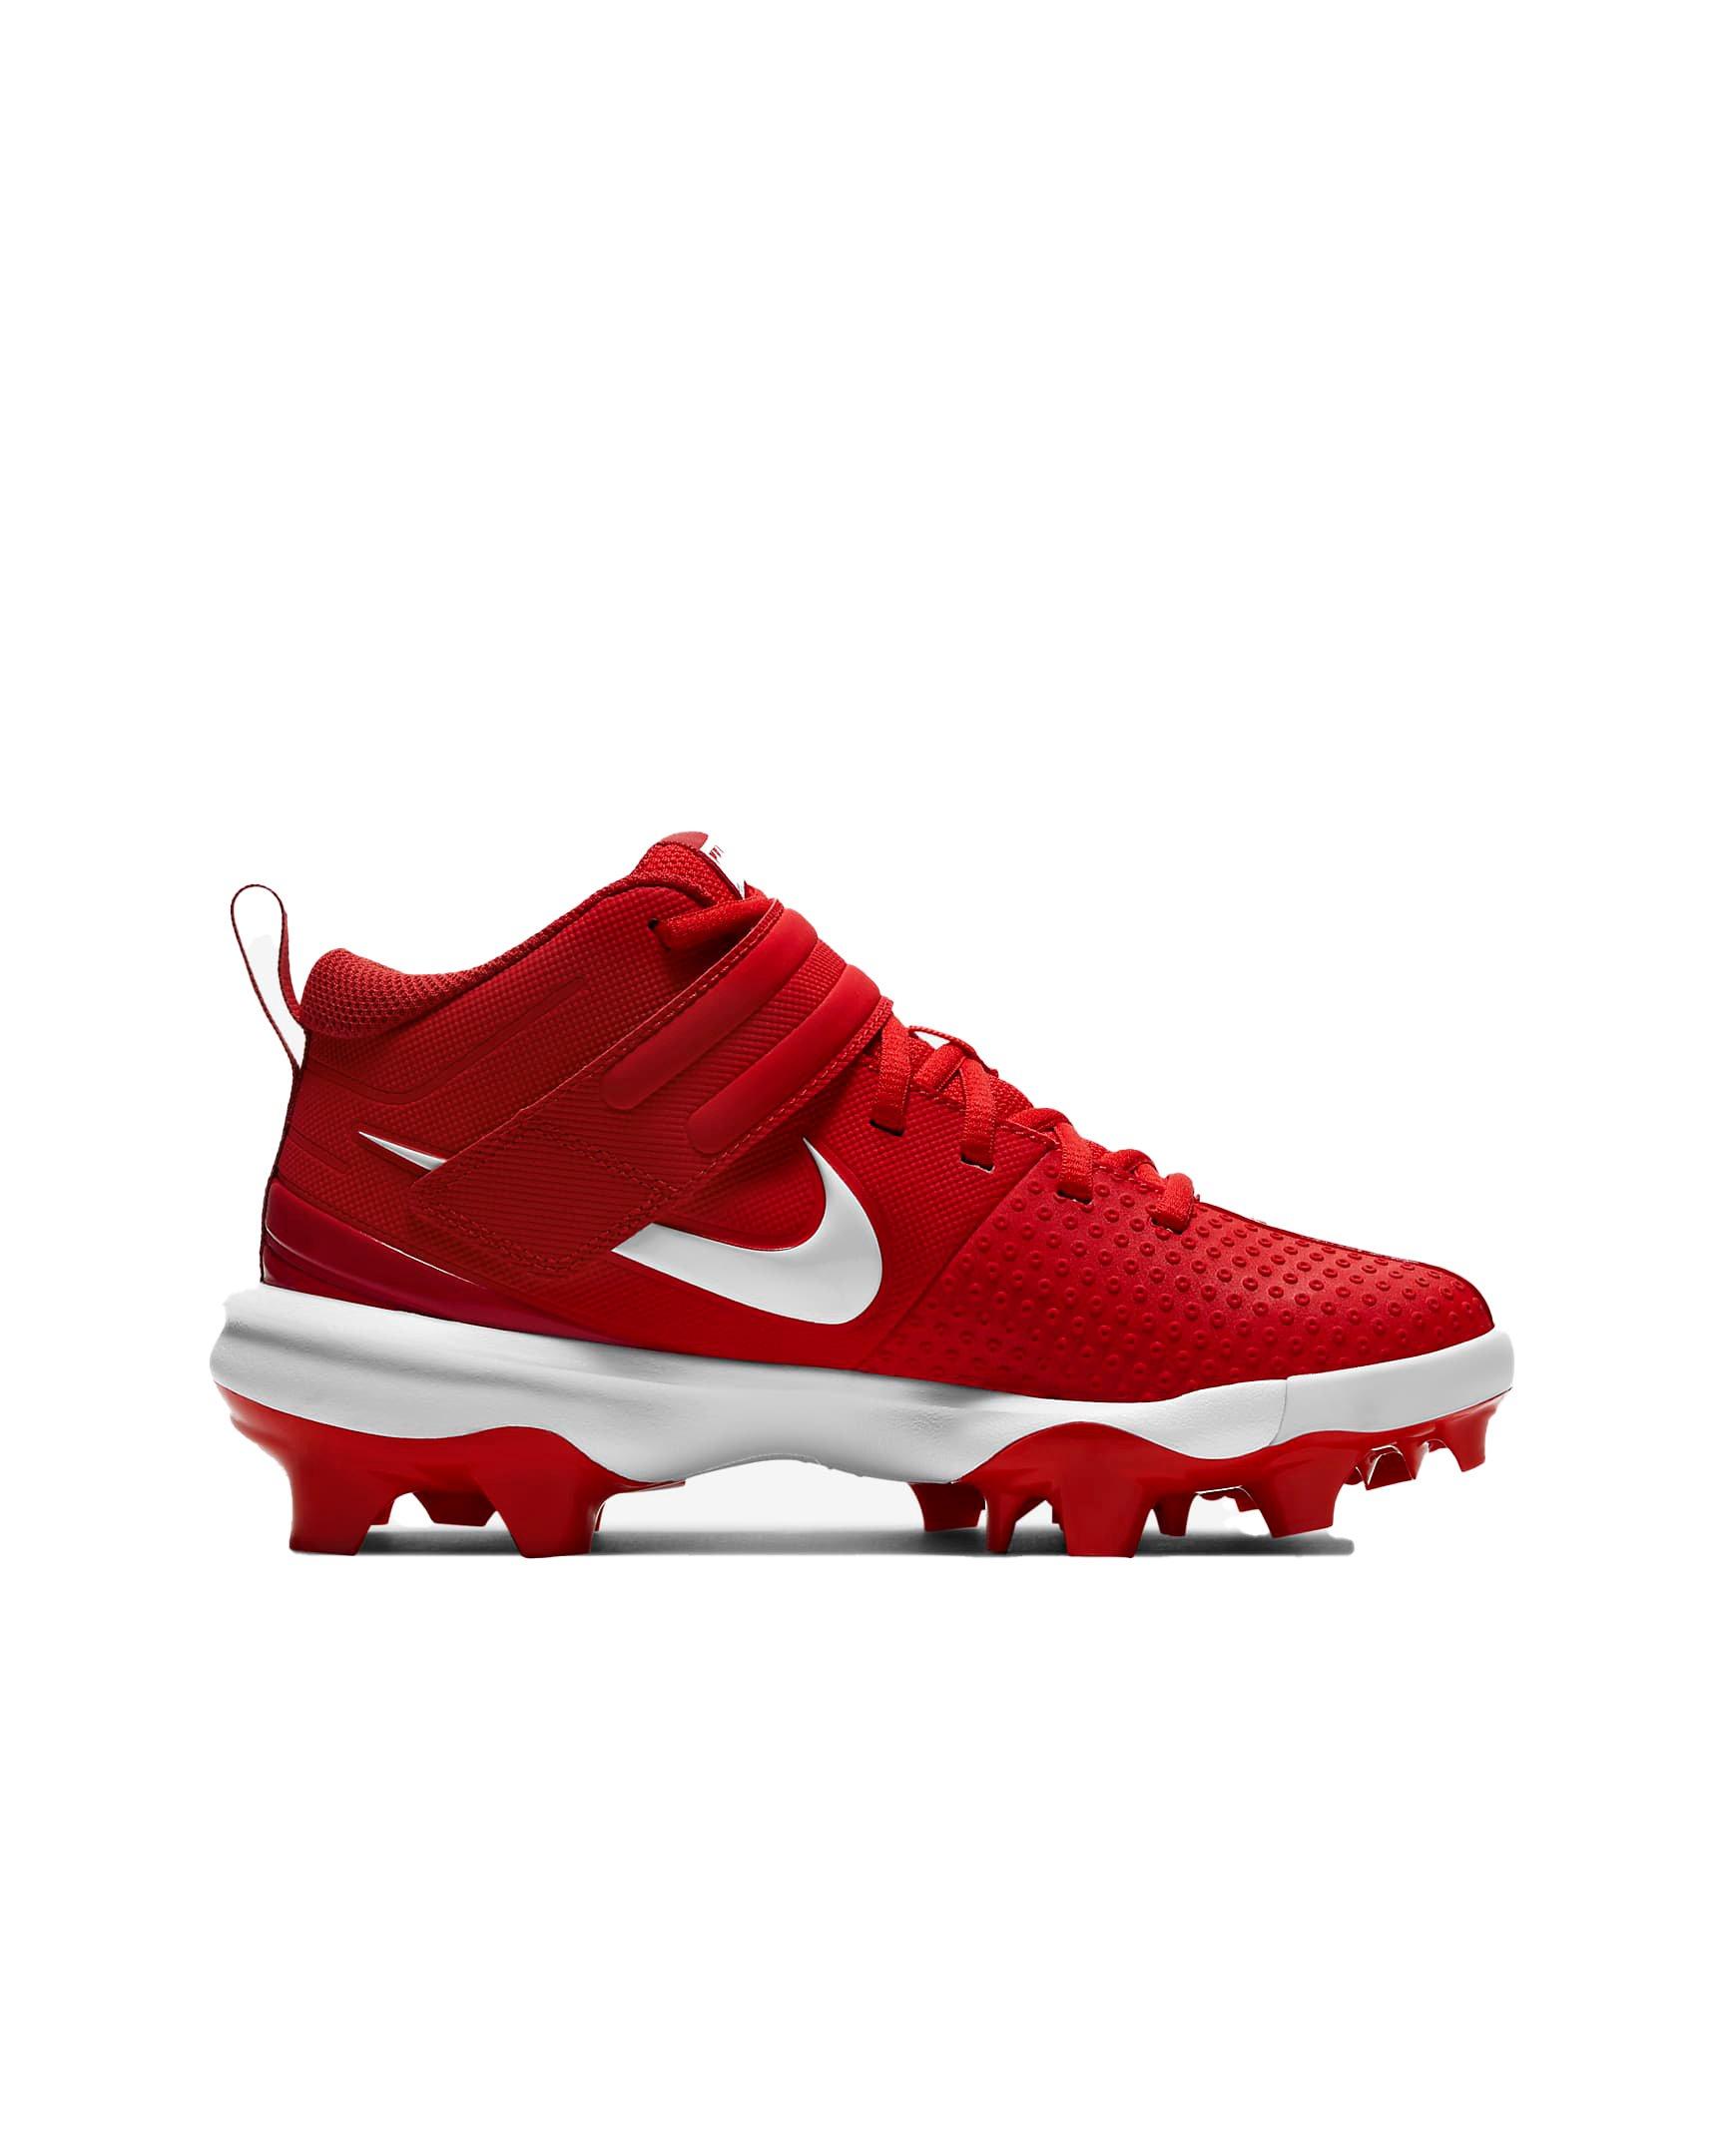 nike trout cleats red, Off 69%